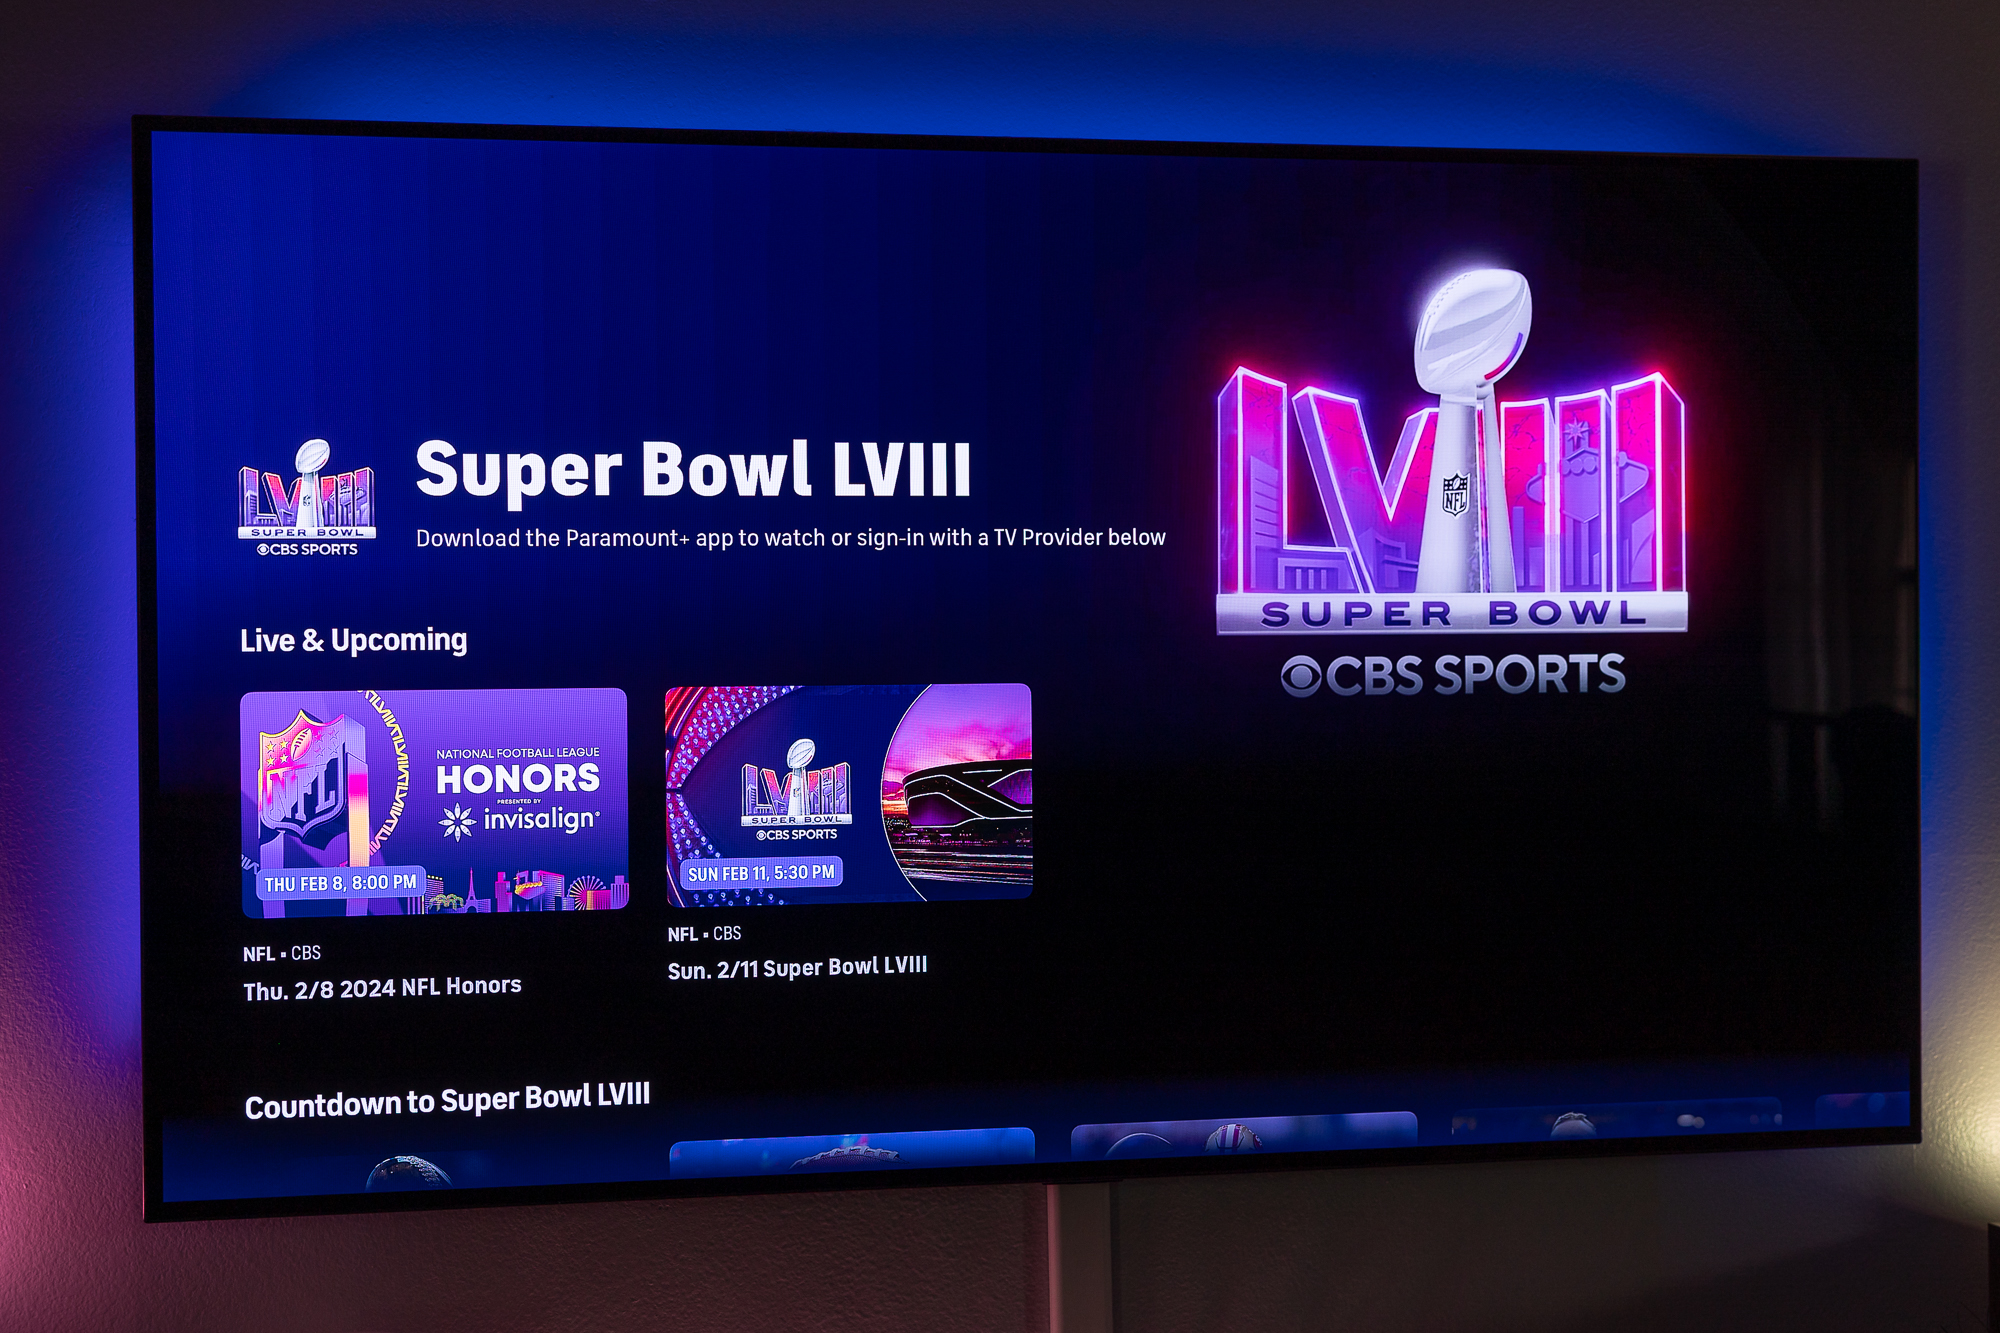 What streaming service is the Super Bowl on and can you watch it